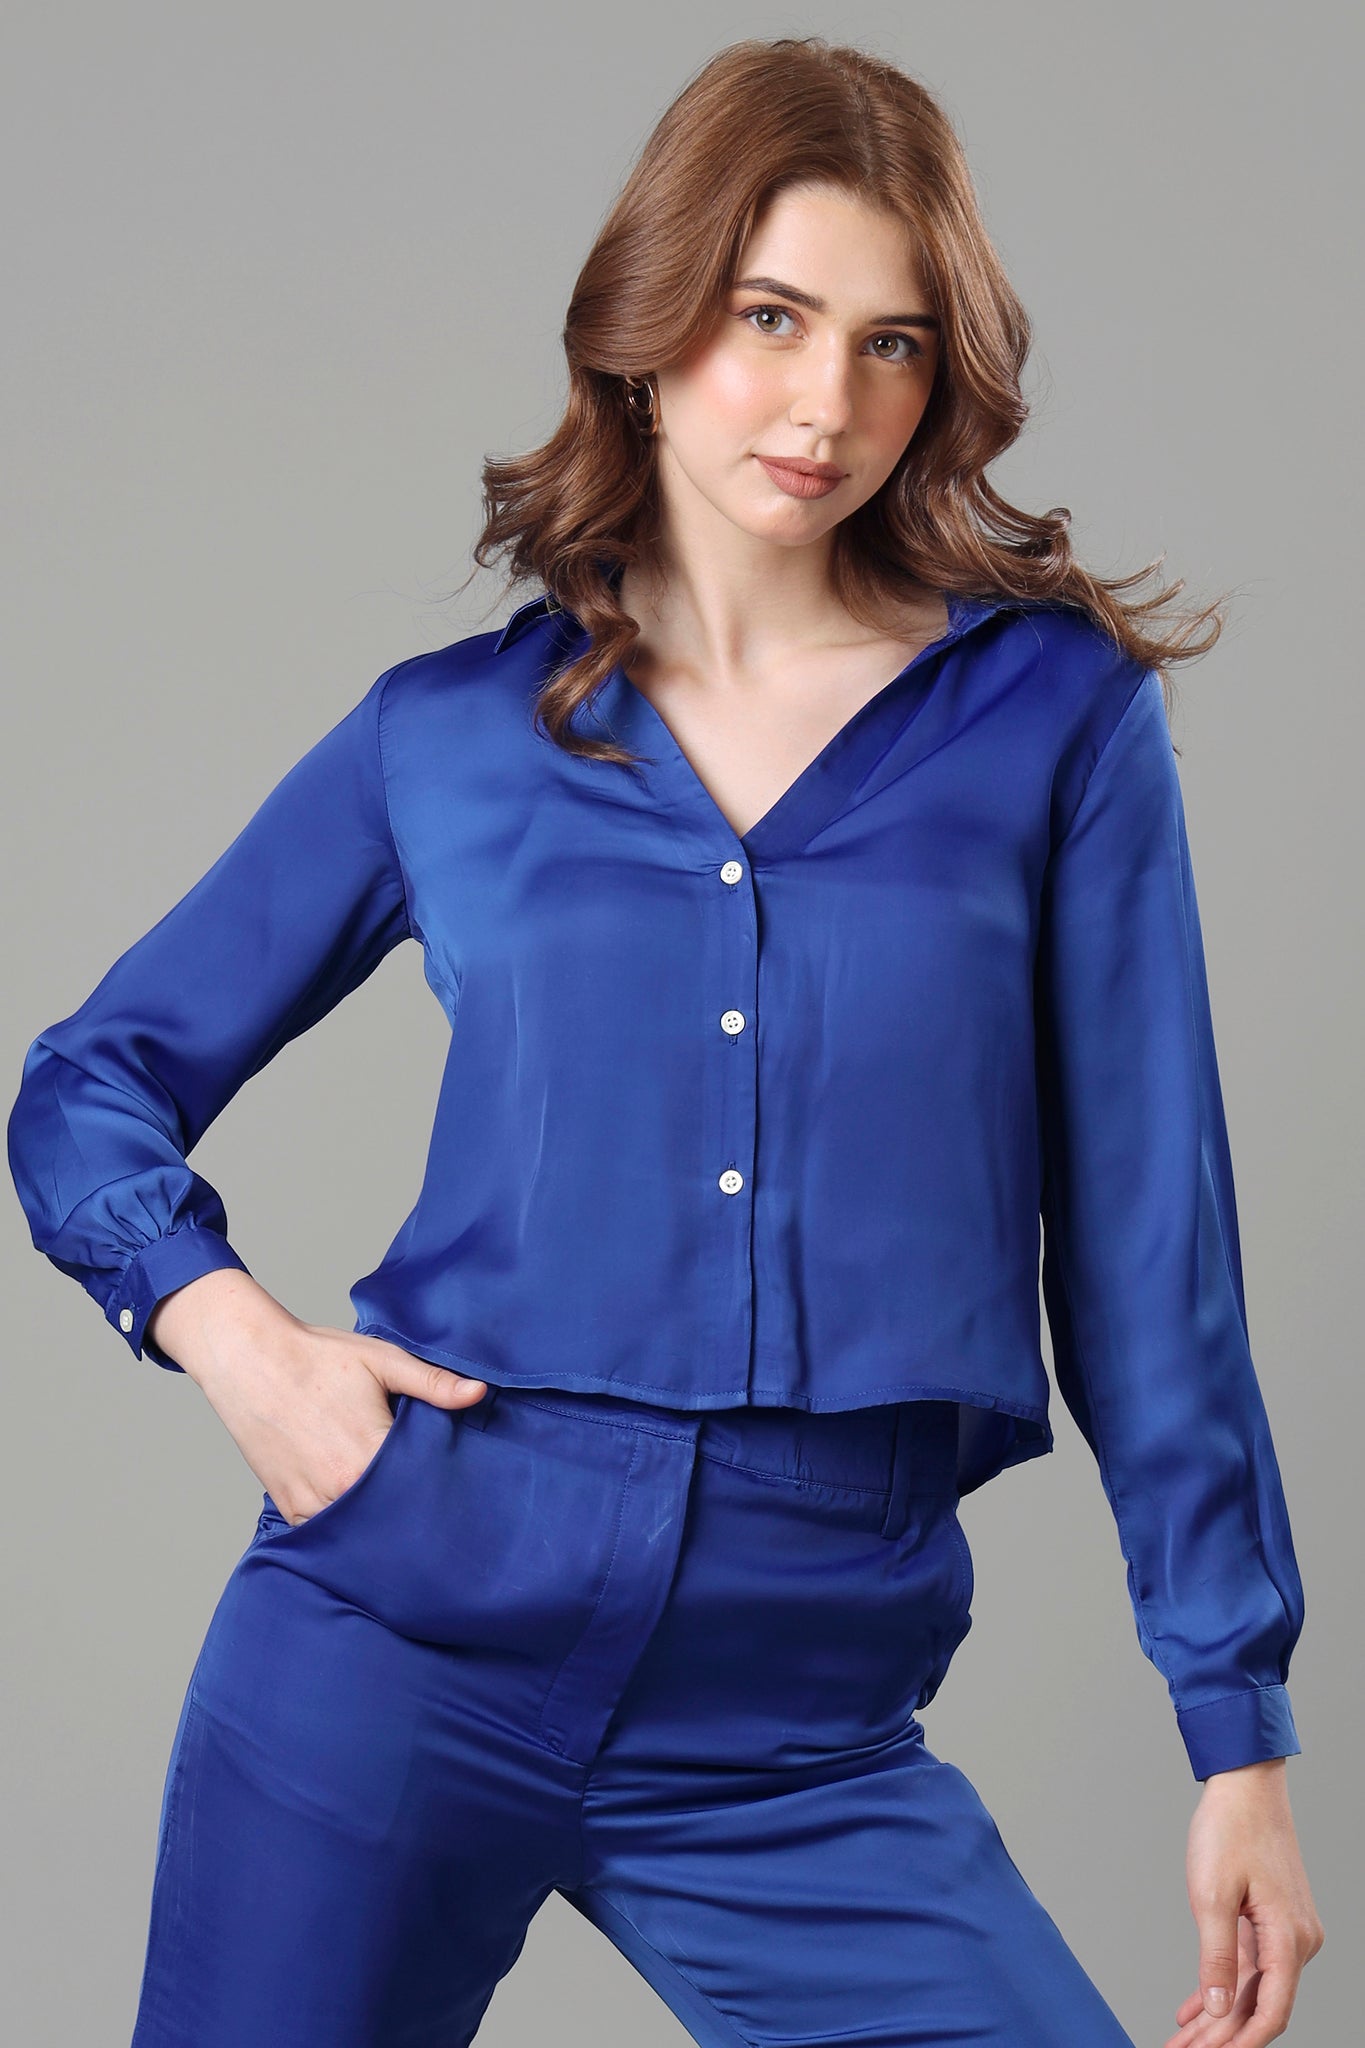 Cool Blue Cropped Shirt For Women